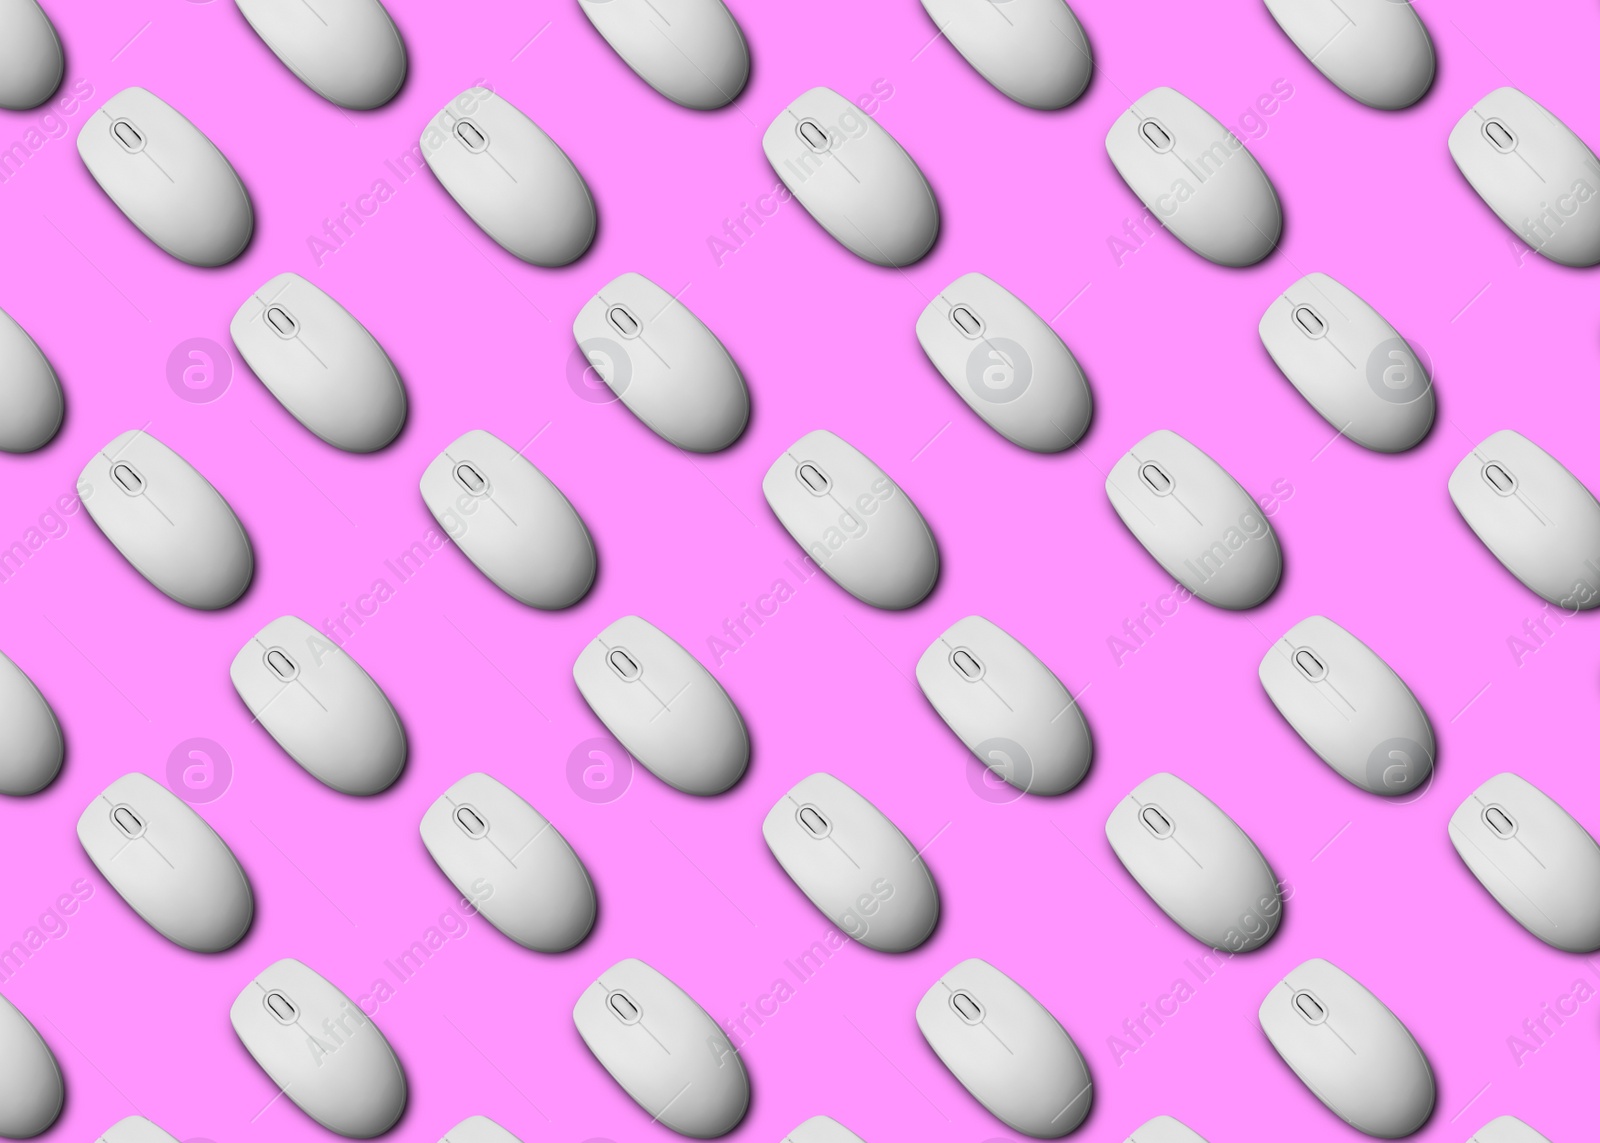 Image of Many white computer mouses on pink background, flat lay. Seamless pattern design